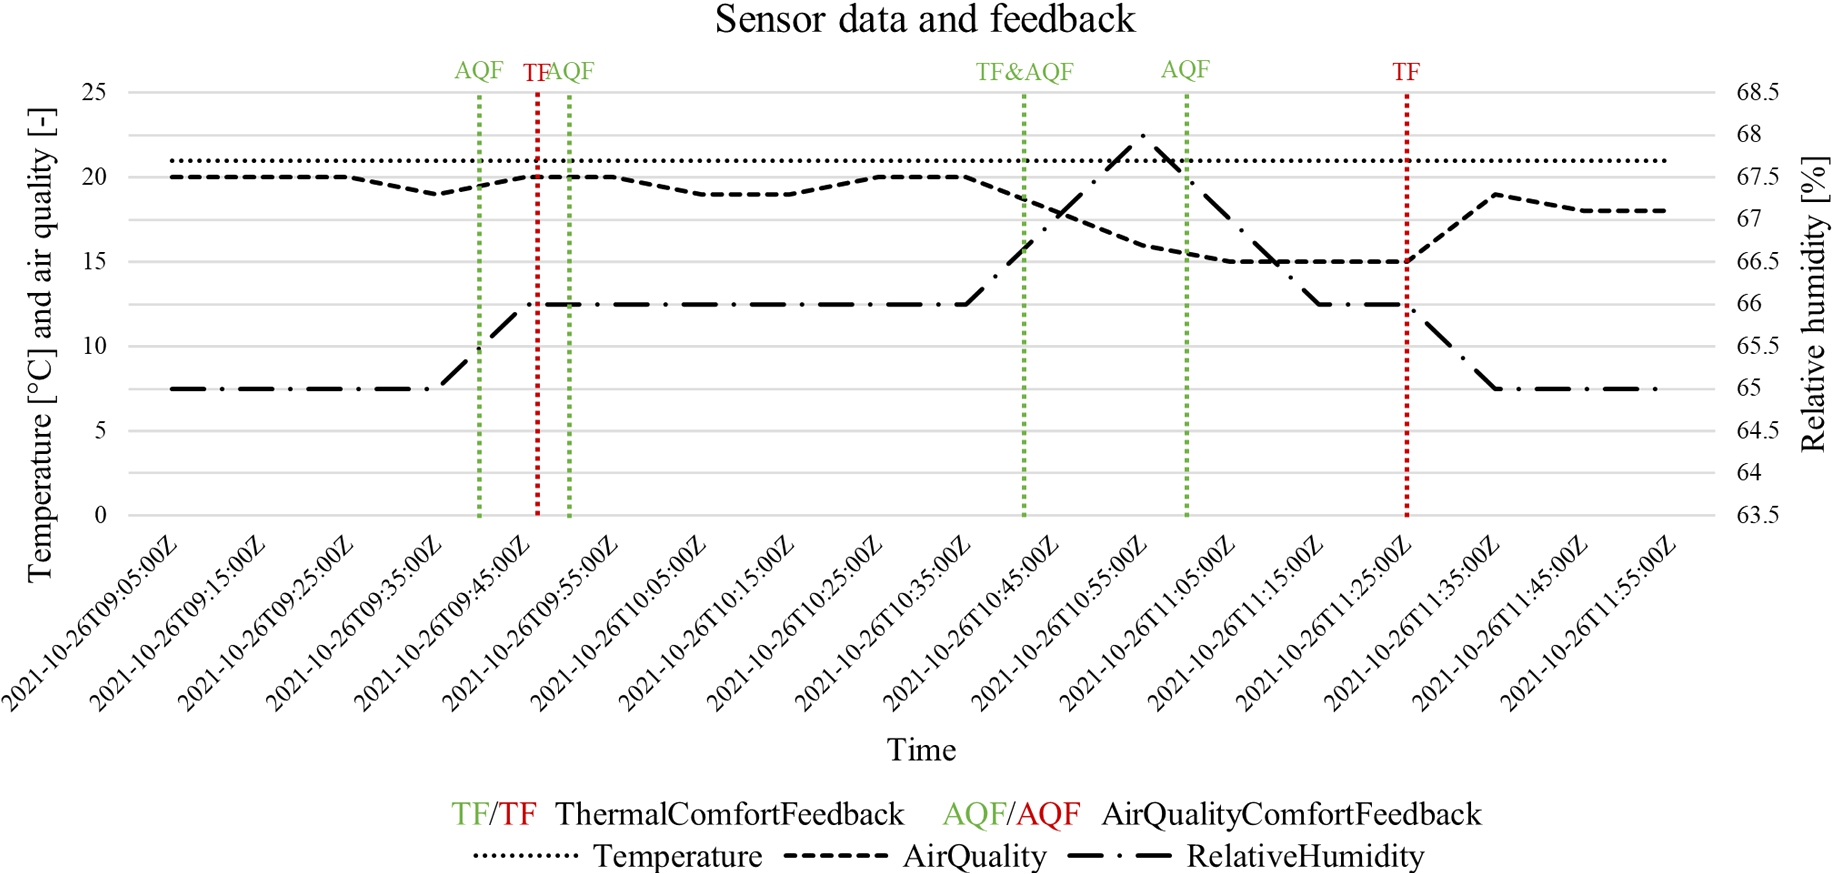 Sensor data in the :Kitchen and feedback given by :JohnDoe.